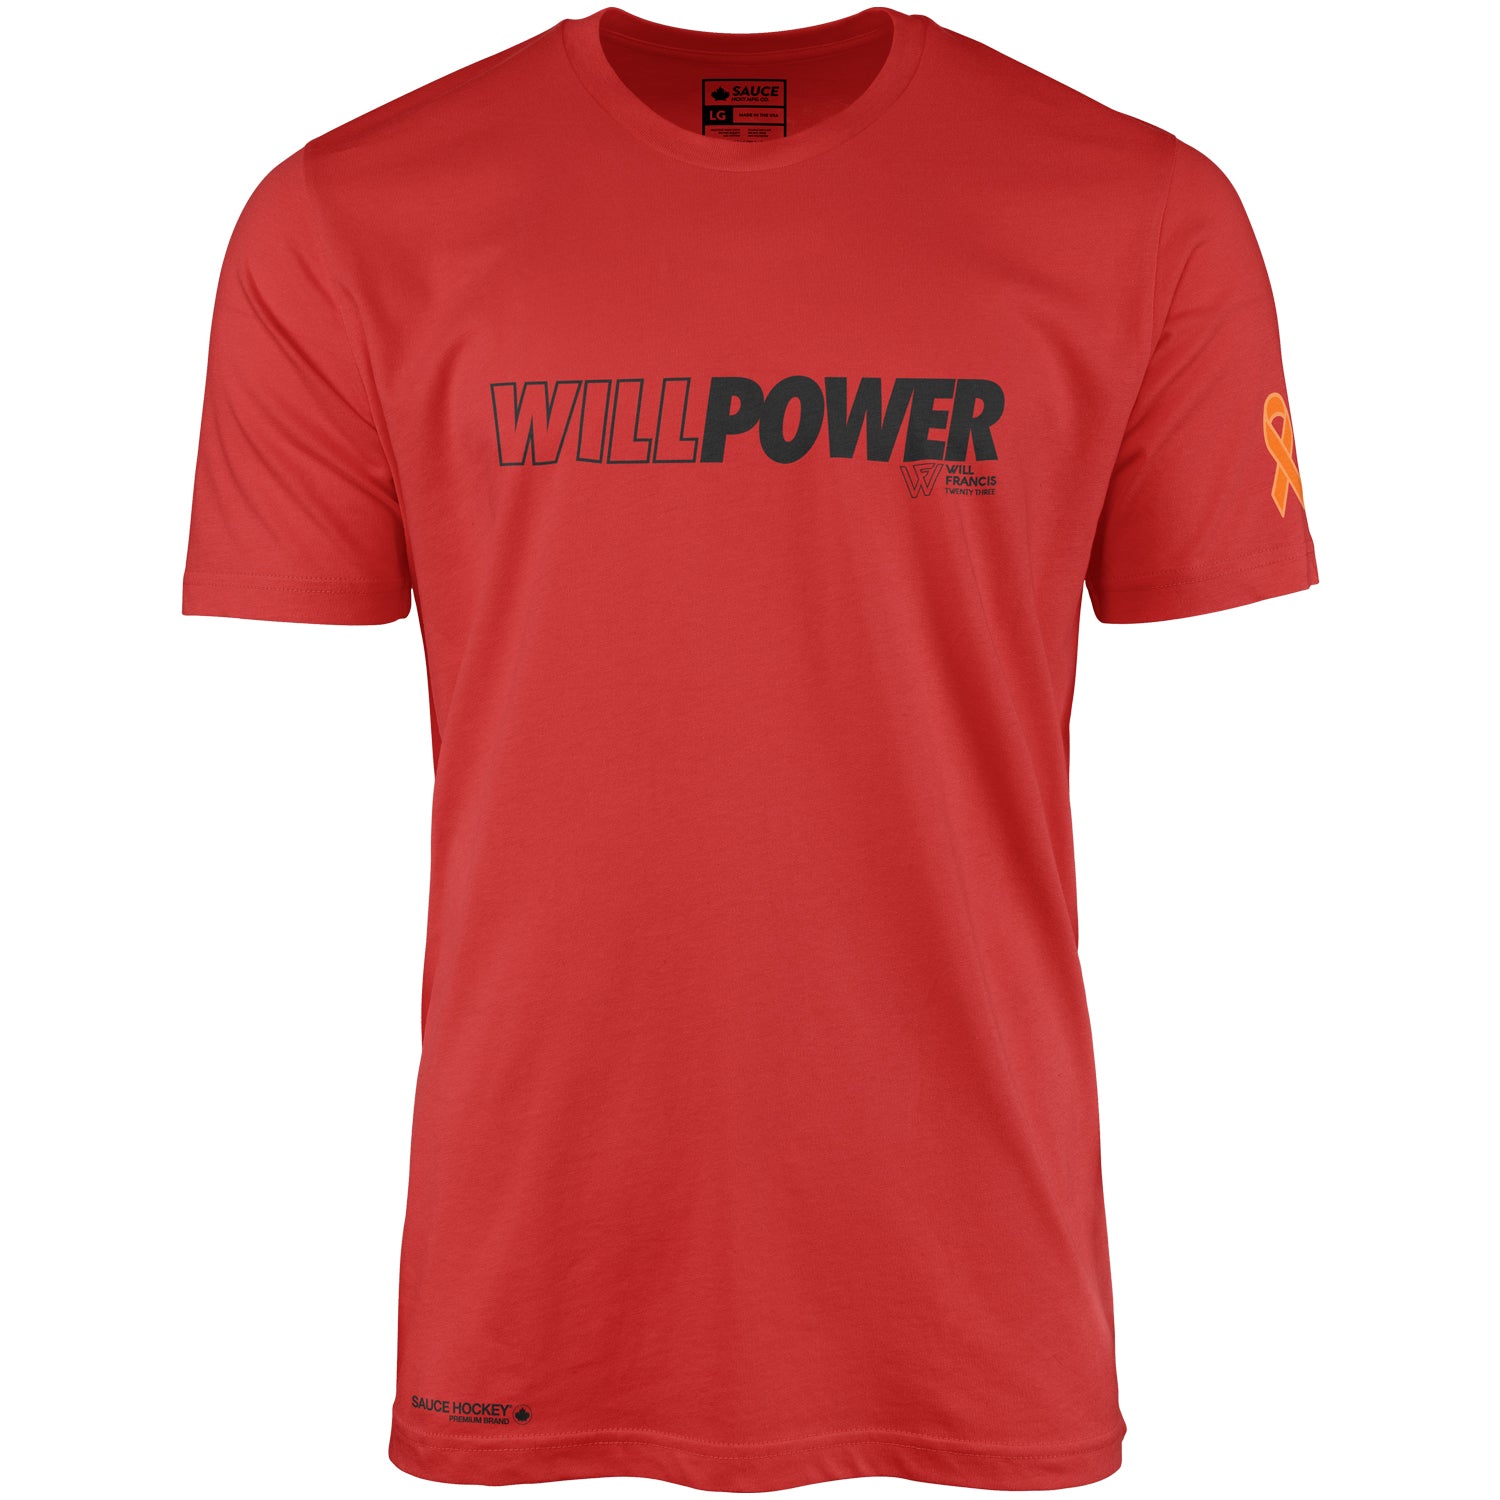 WILLPOWER - RED